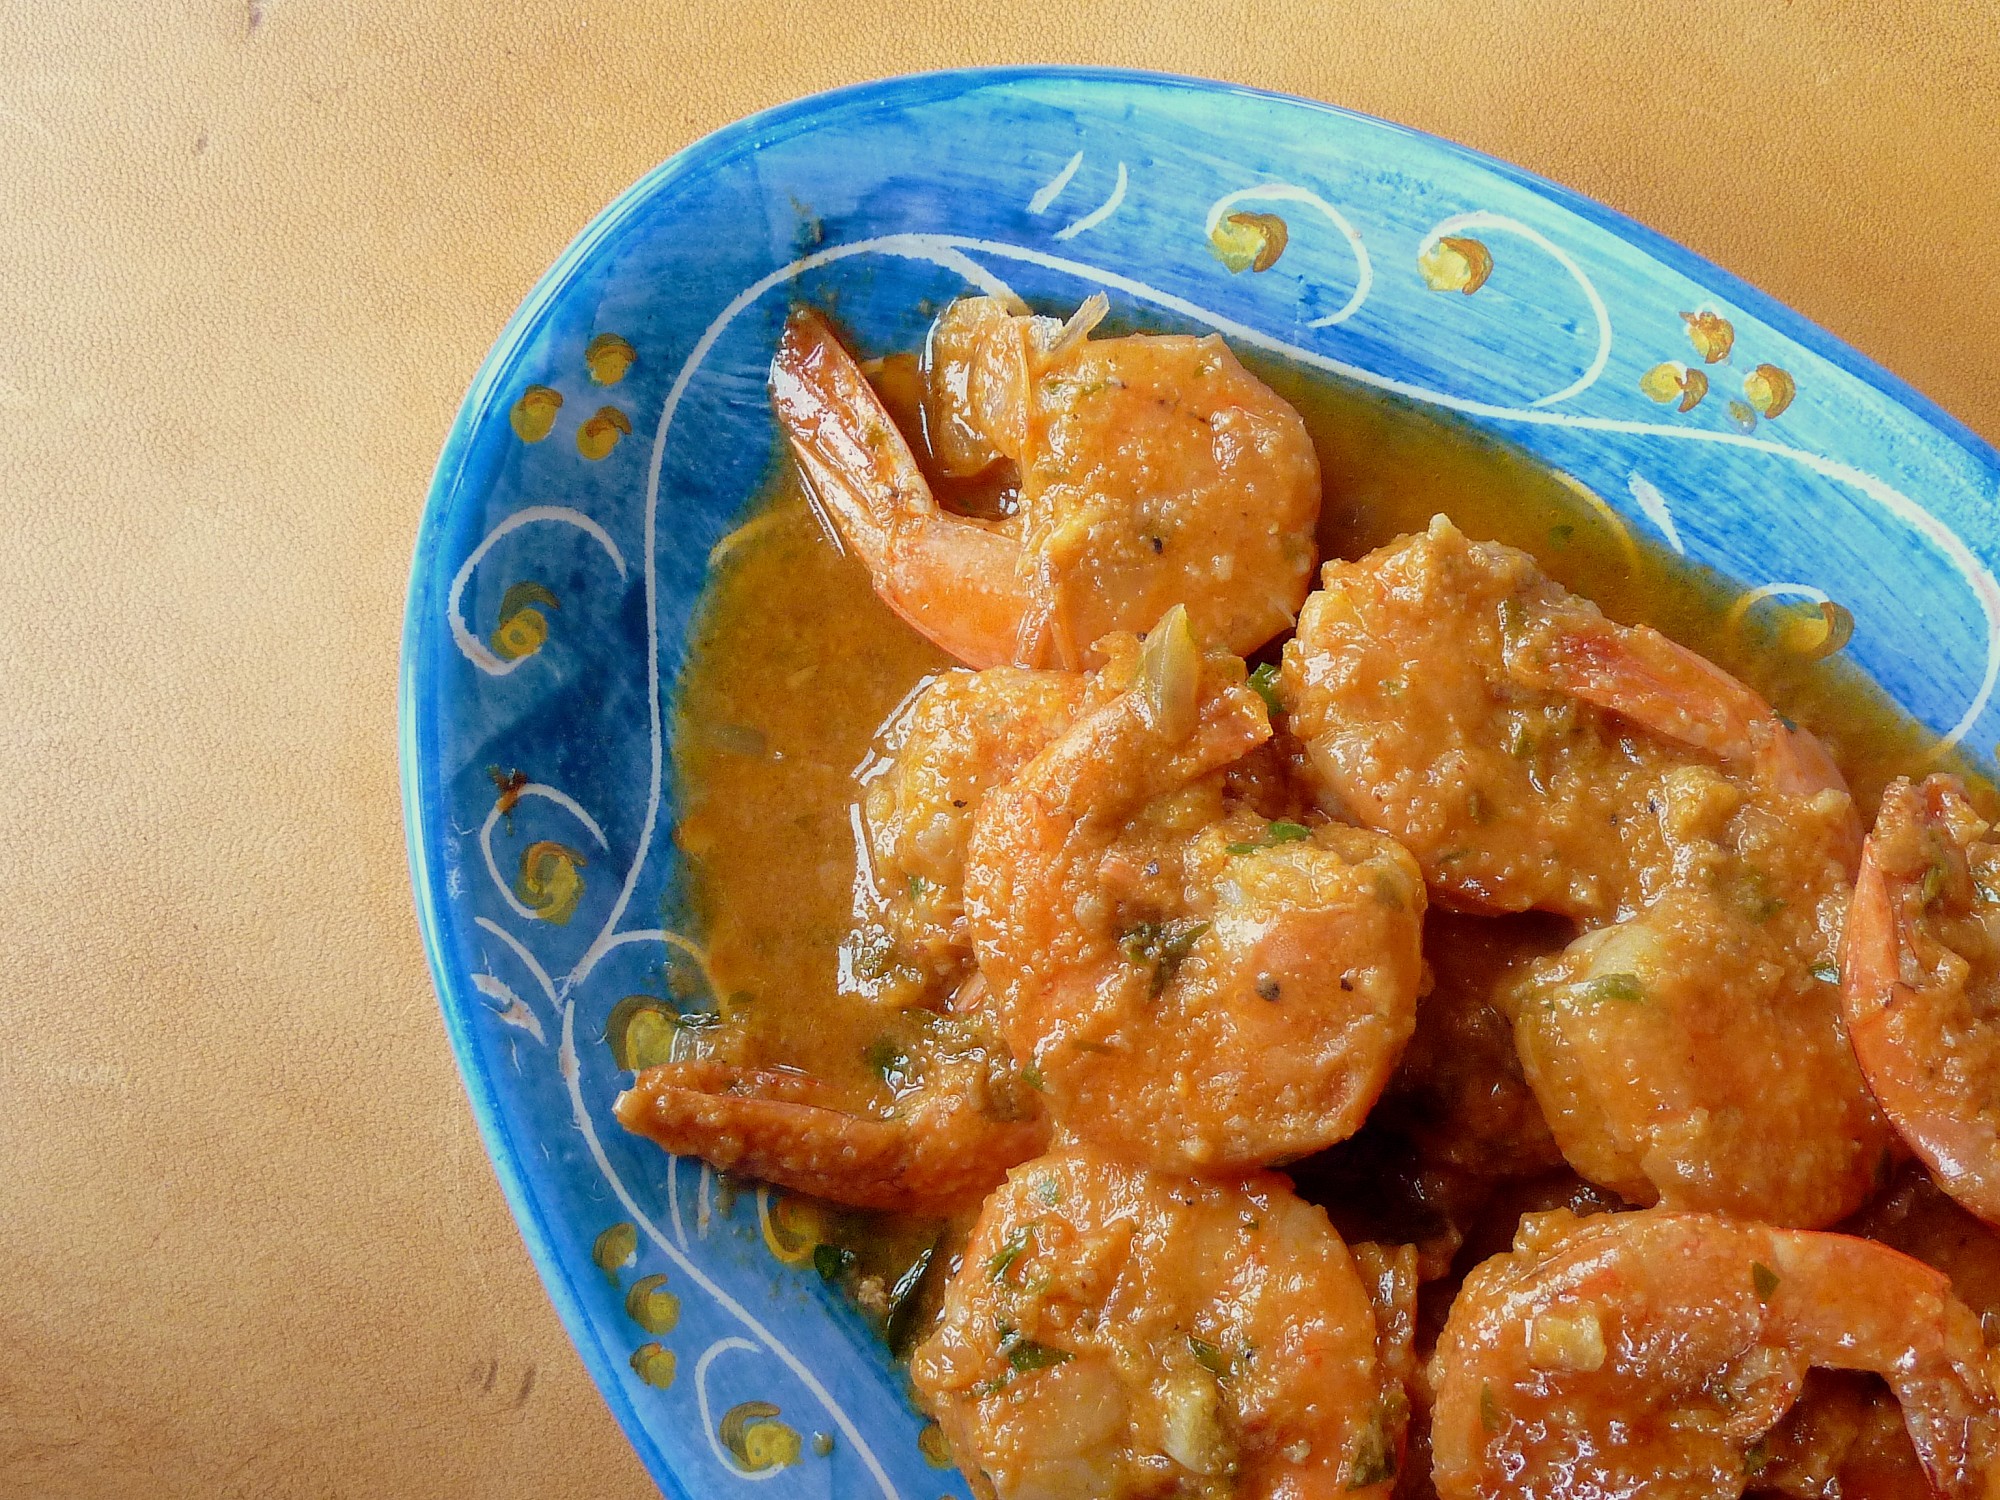 Buzara with shrimps - Simply delicious! One of the best Croatian dishes